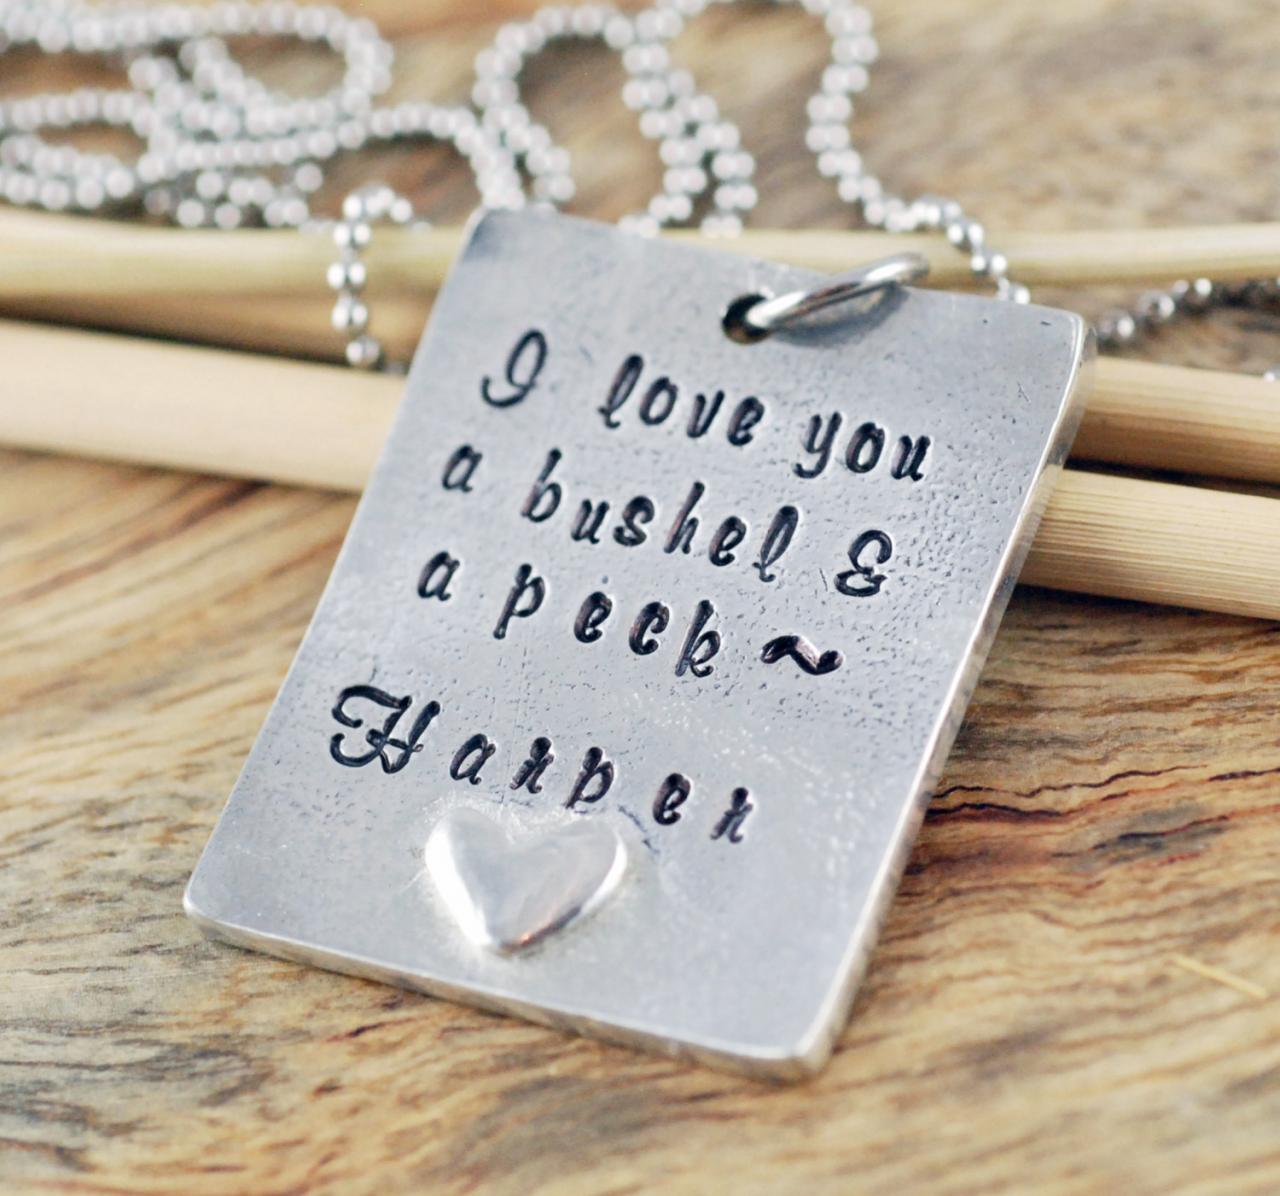 Personalized Necklace - I Love You A Bushel And A Peck - Custom Hand Stamped - Hand Stamped Necklace - Pewter Necklace - Mommy Necklace